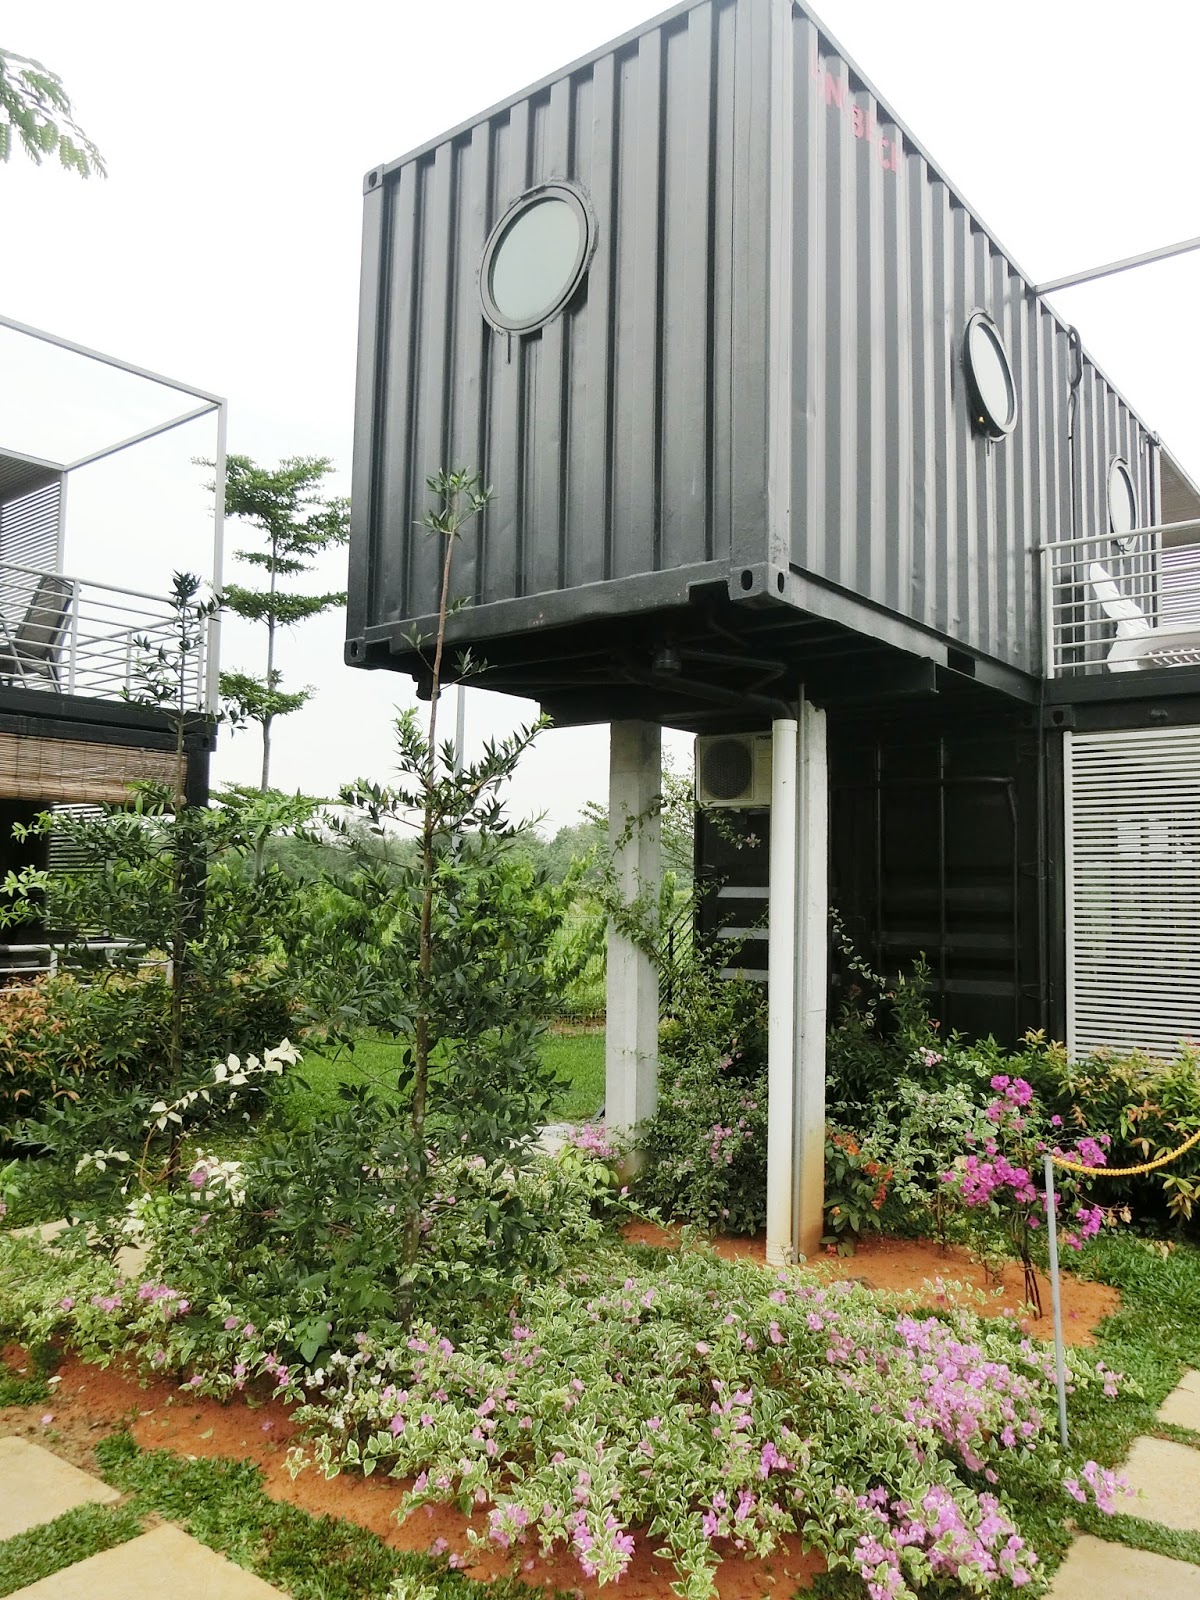 Case Study iShipping Container Architecturei